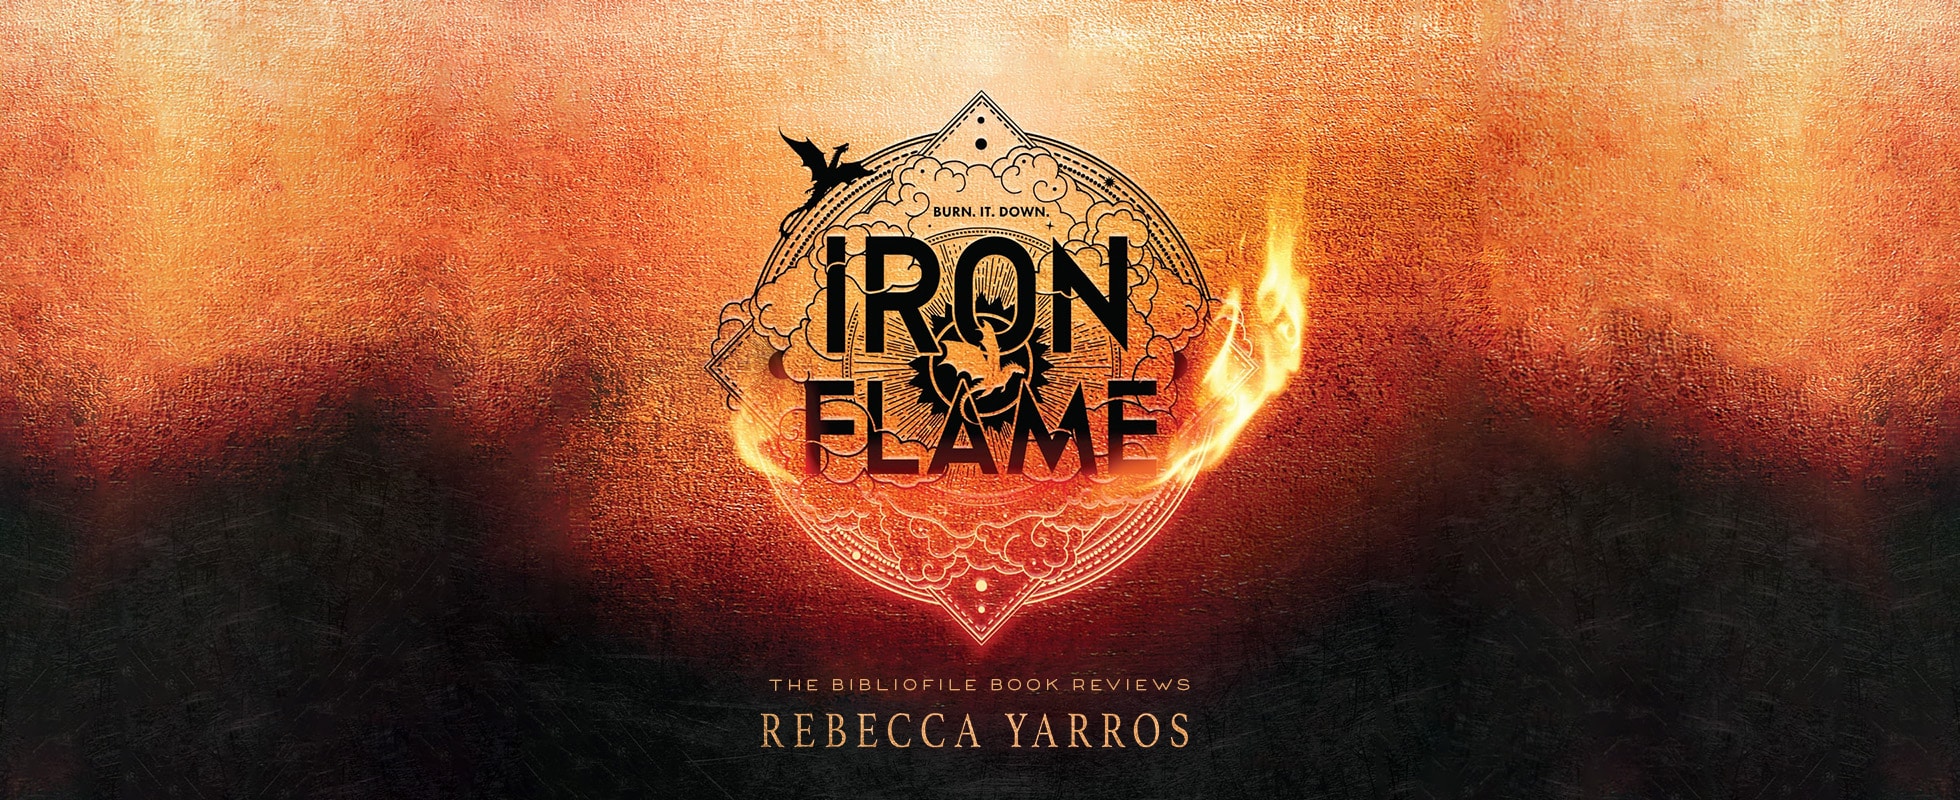 iron flame by rebecca yarros empyrean series book review plot summary synopsis recap discussion spoilers